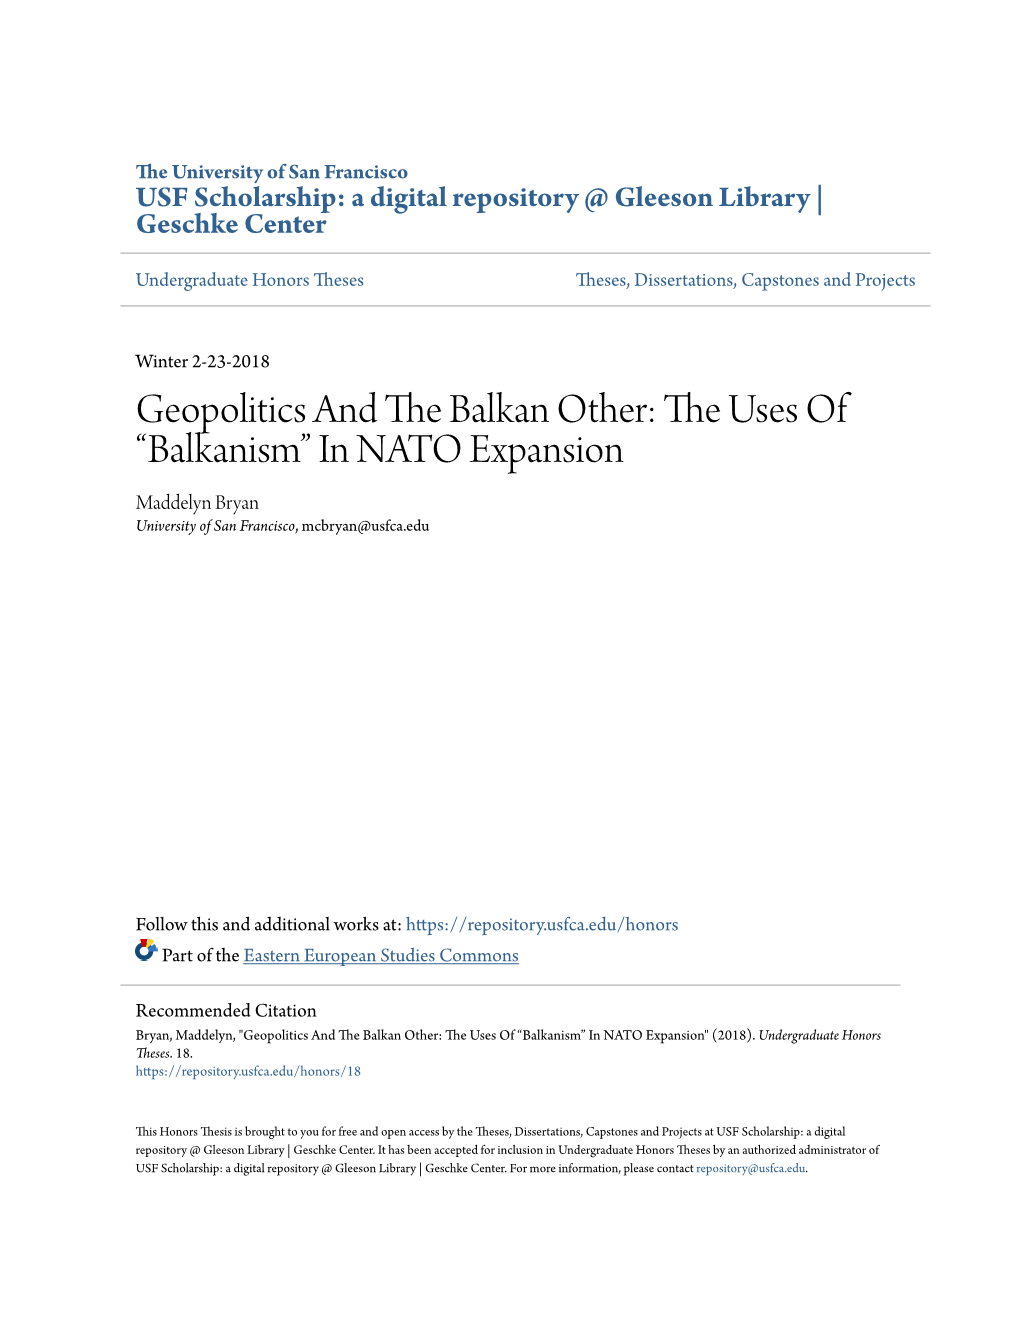 Geopolitics and the Balkan Other: the Uses of “Balkanism” in NATO Expansion